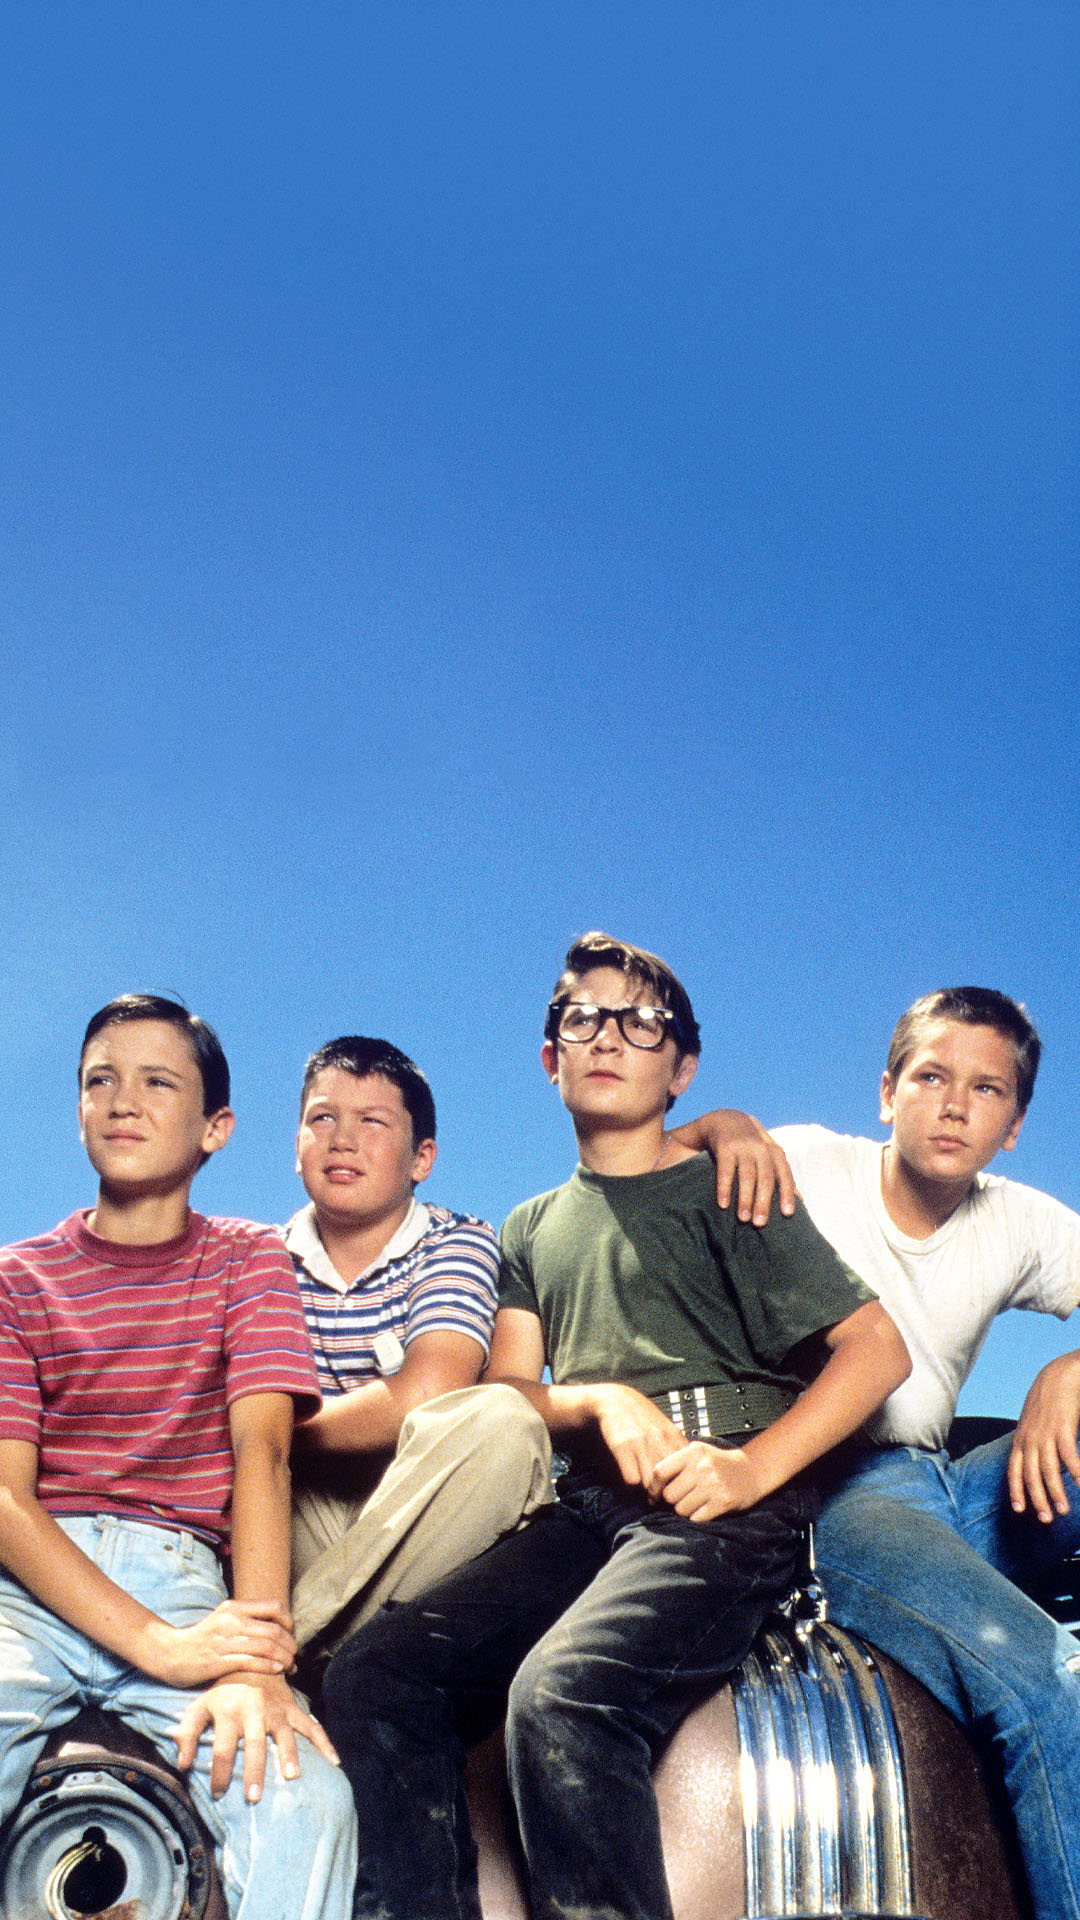 stand by me cast then and now